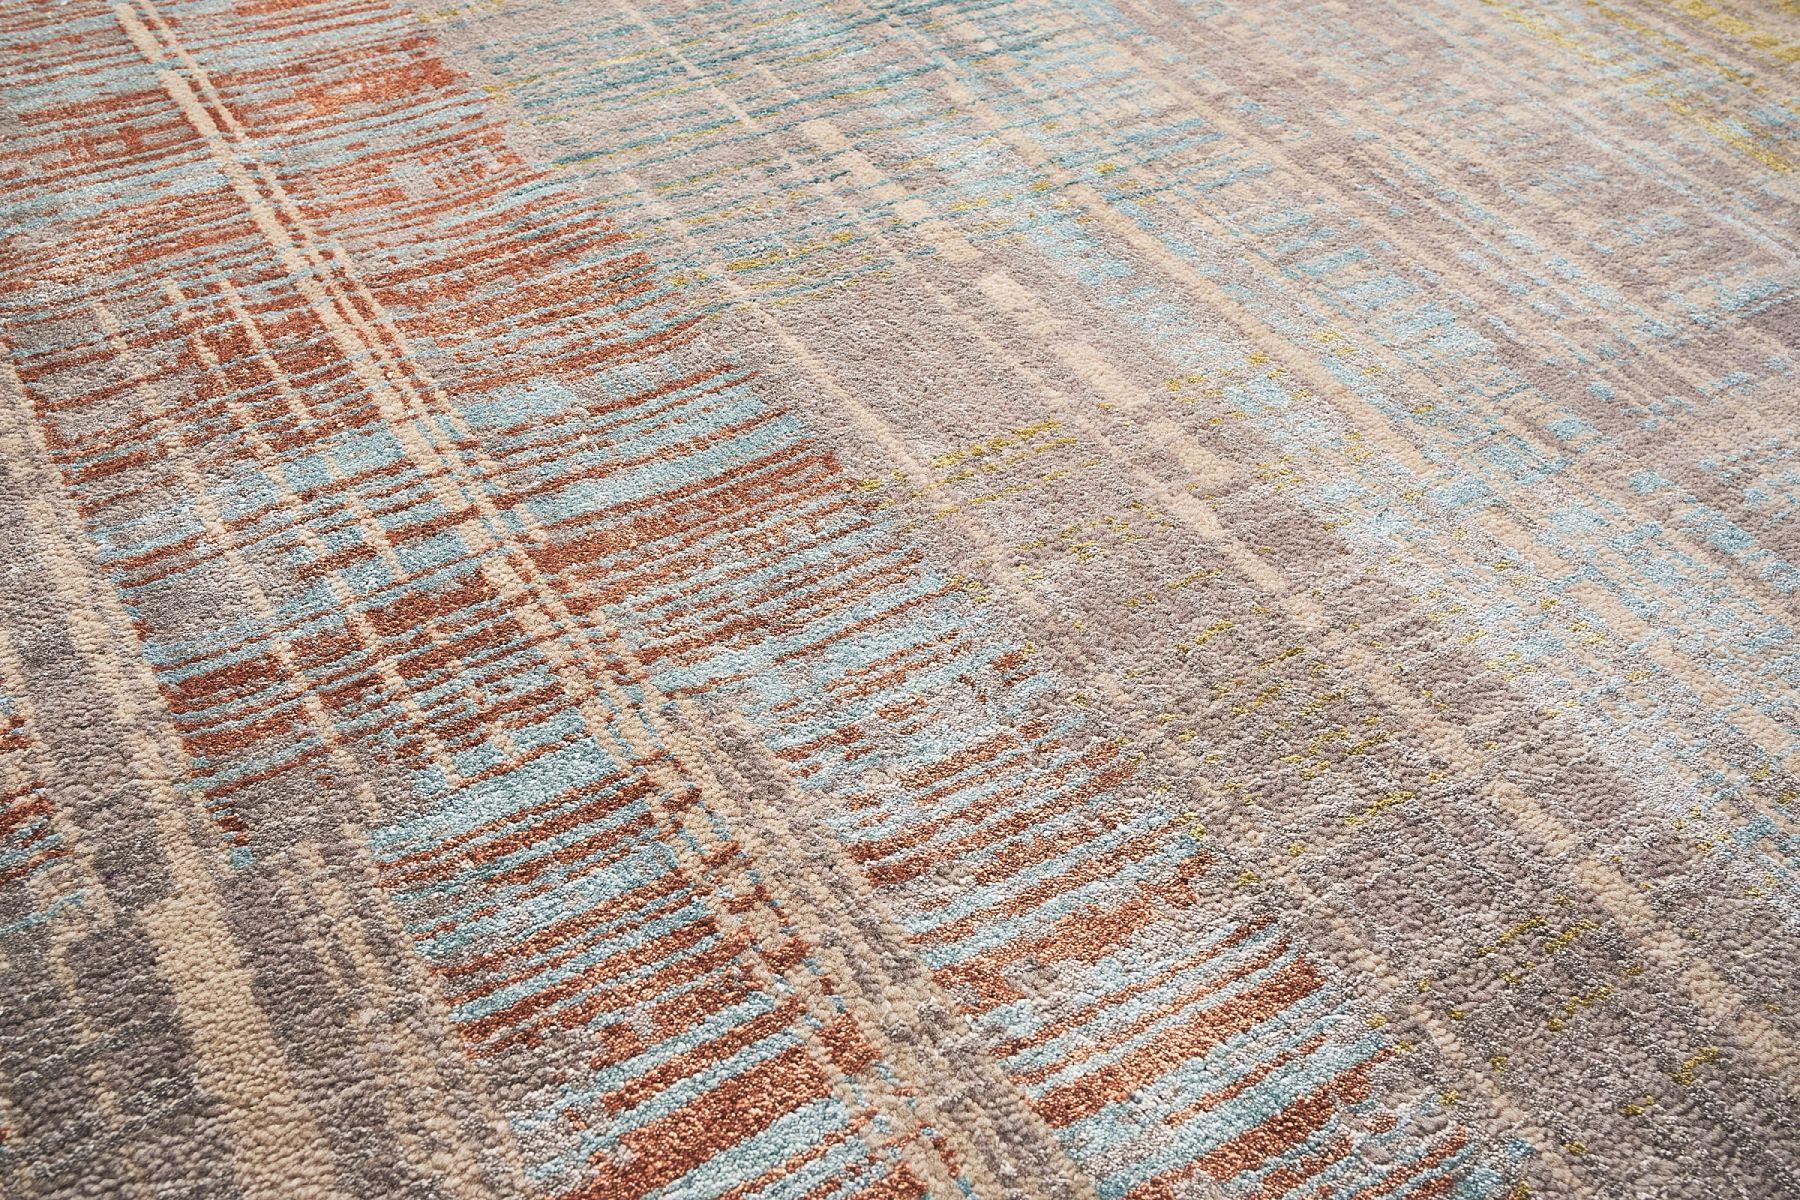 A beautiful, colourful carpet from the Intersections pattern, made in the 2000s. The carpet is made of beautifully visible hand-knotted wool and silk. What makes this carpet unique is its intertwining of colours, which makes it match any